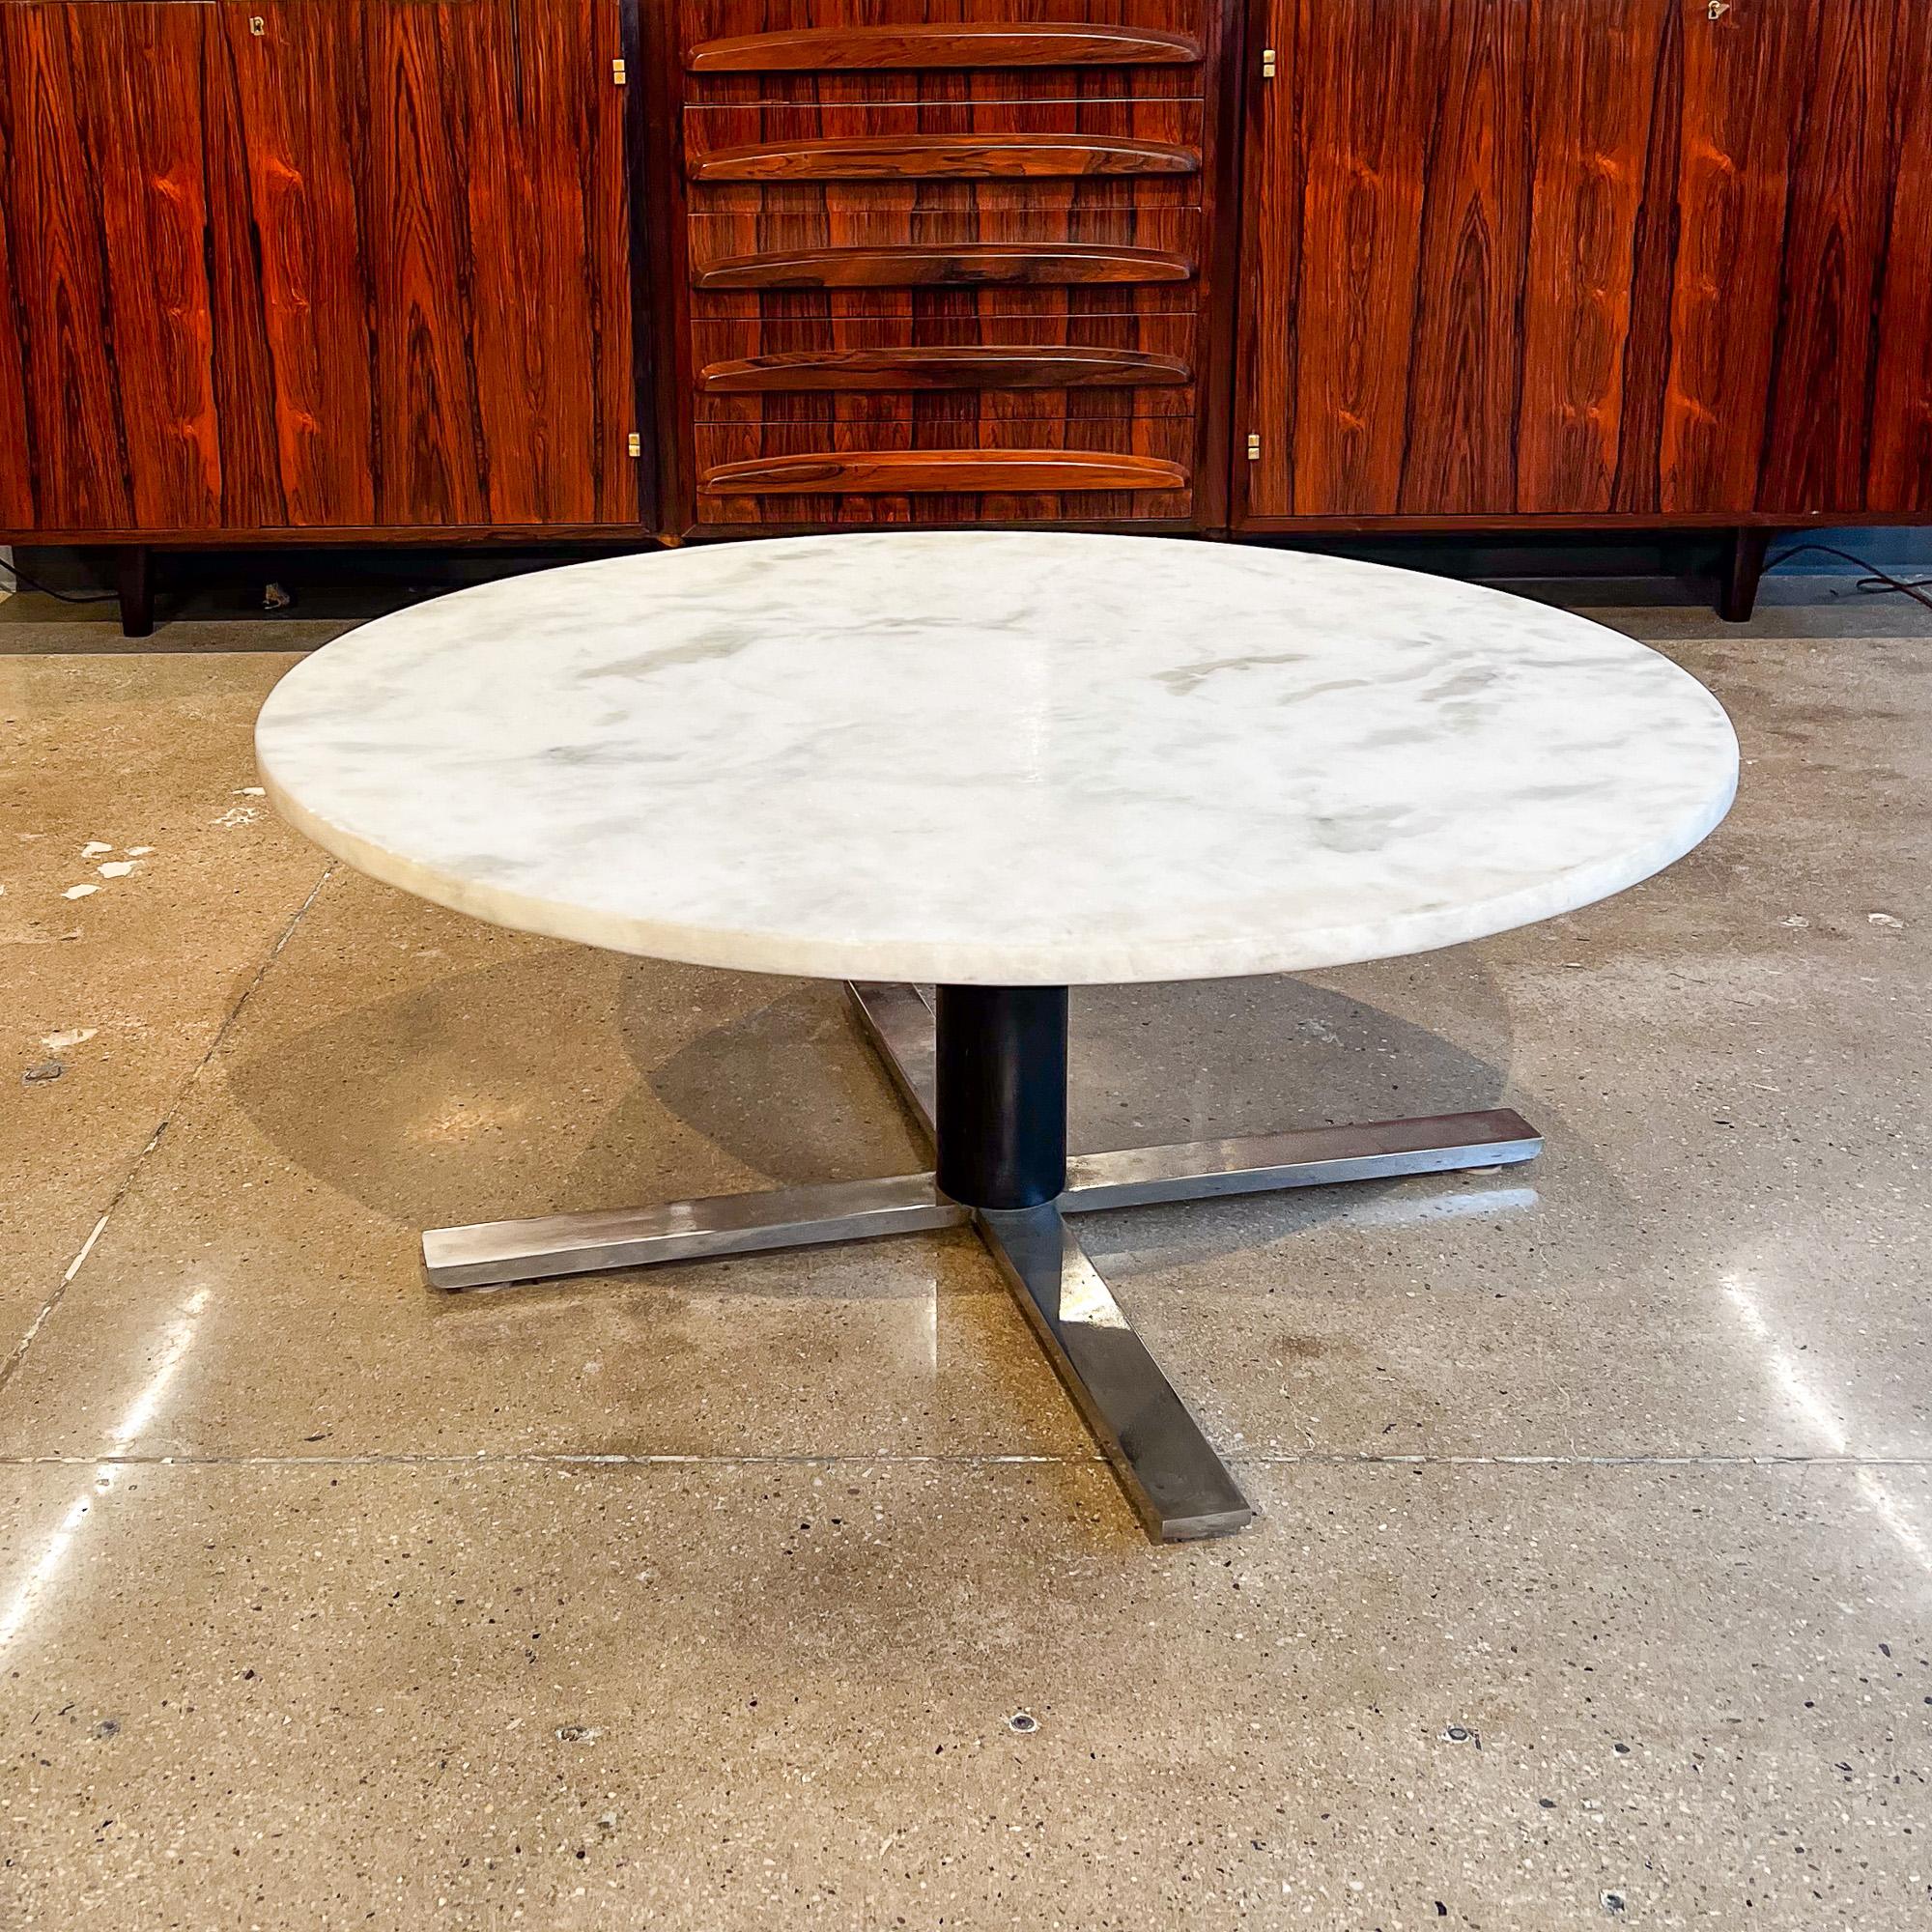 Metalwork “Chancellor” Coffee Table with Marble Top by Jorge Zalszupin, c. 1960 For Sale